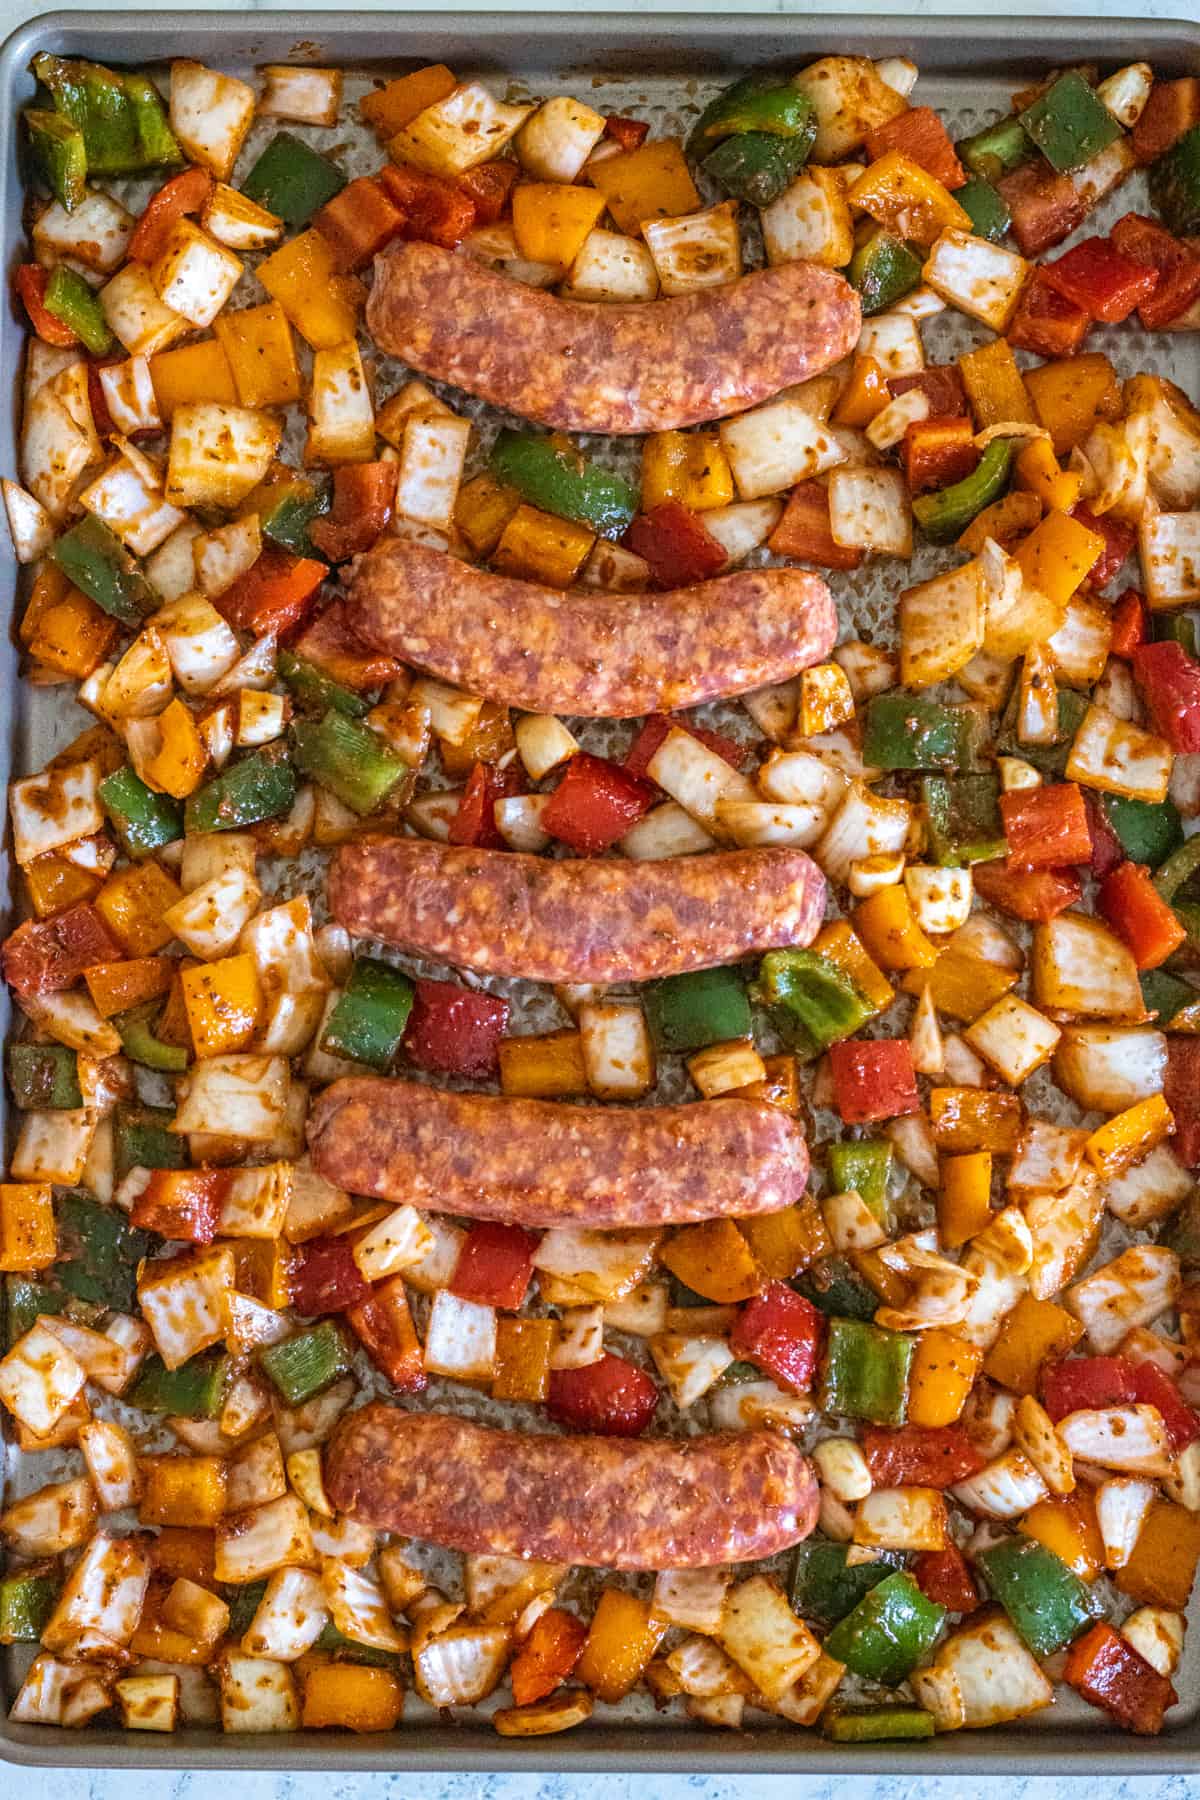 Sausages, peppers, and onions spread out on a sheet pan.